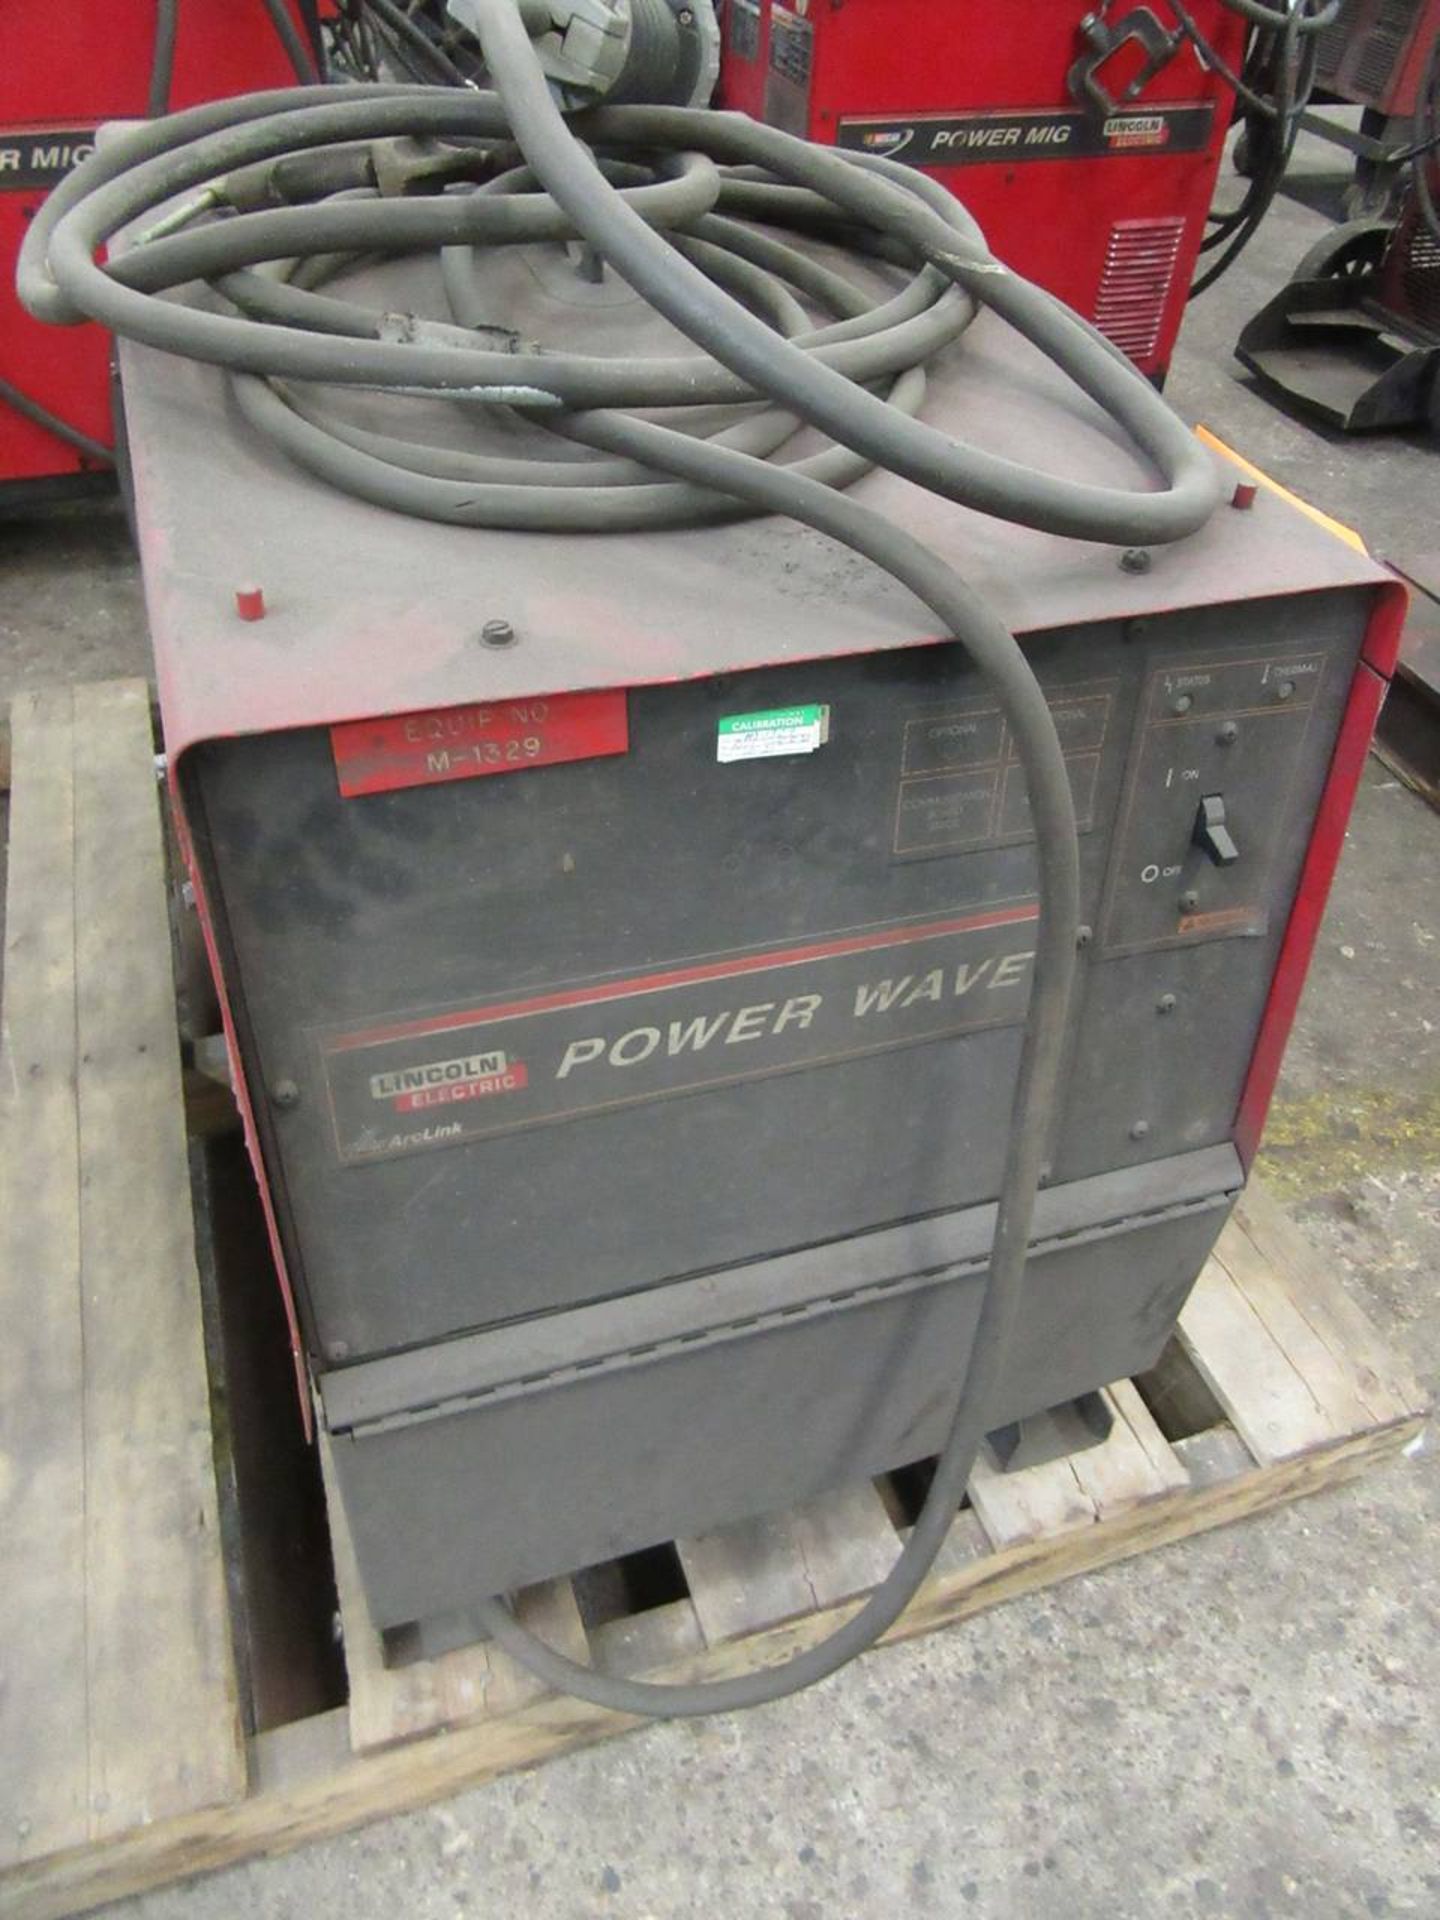 2007 Lincoln Power Wave 455M Advance Process Welder - Image 3 of 4